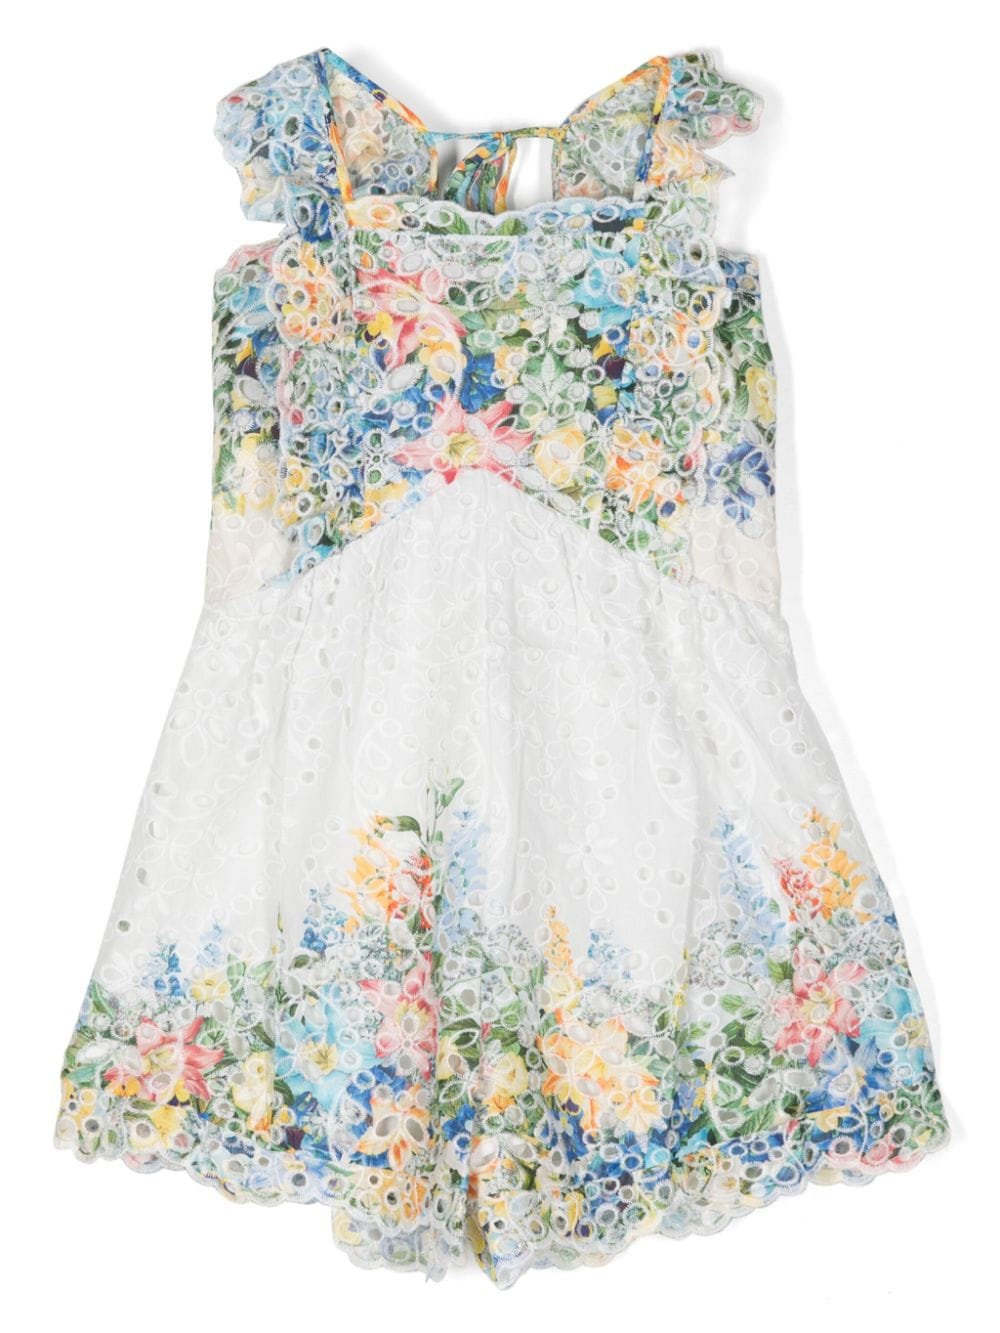 Marlo Kids' Serenity Embroidered Dress In White